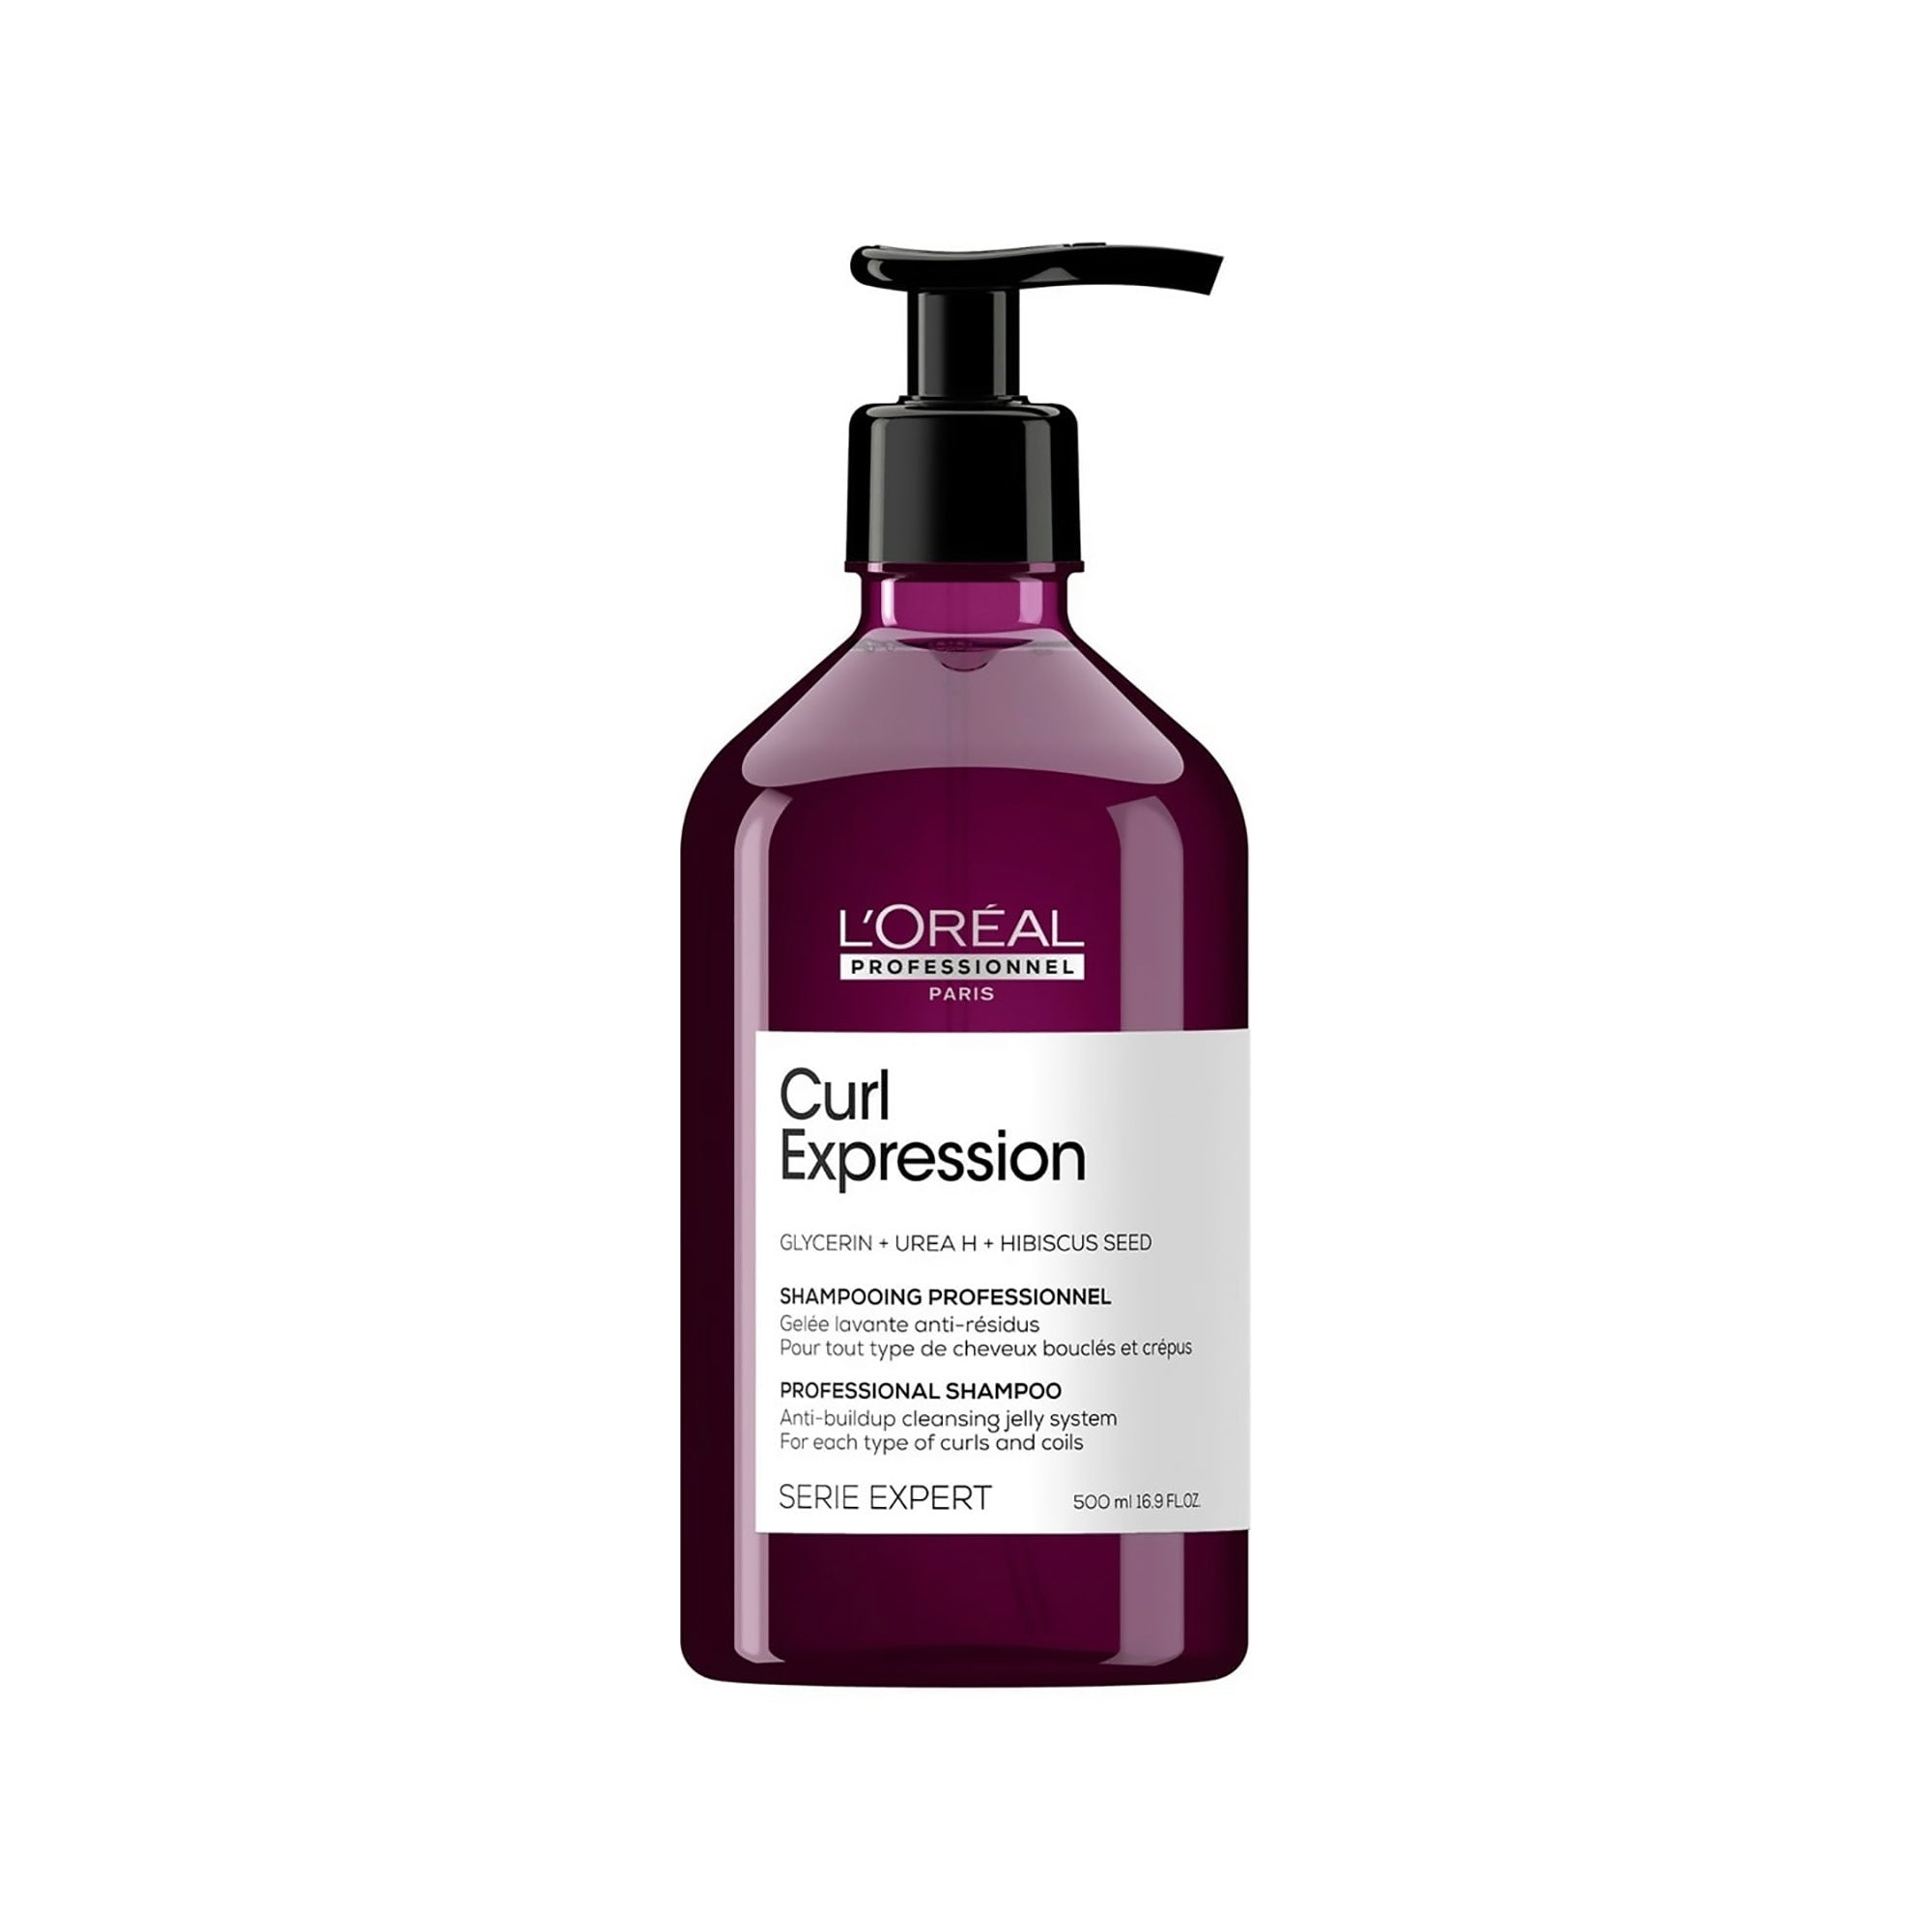 L'Oreal Serie Expert Curl Expression Anti-Build Up Cleansing Shampoo / 16.9OZ